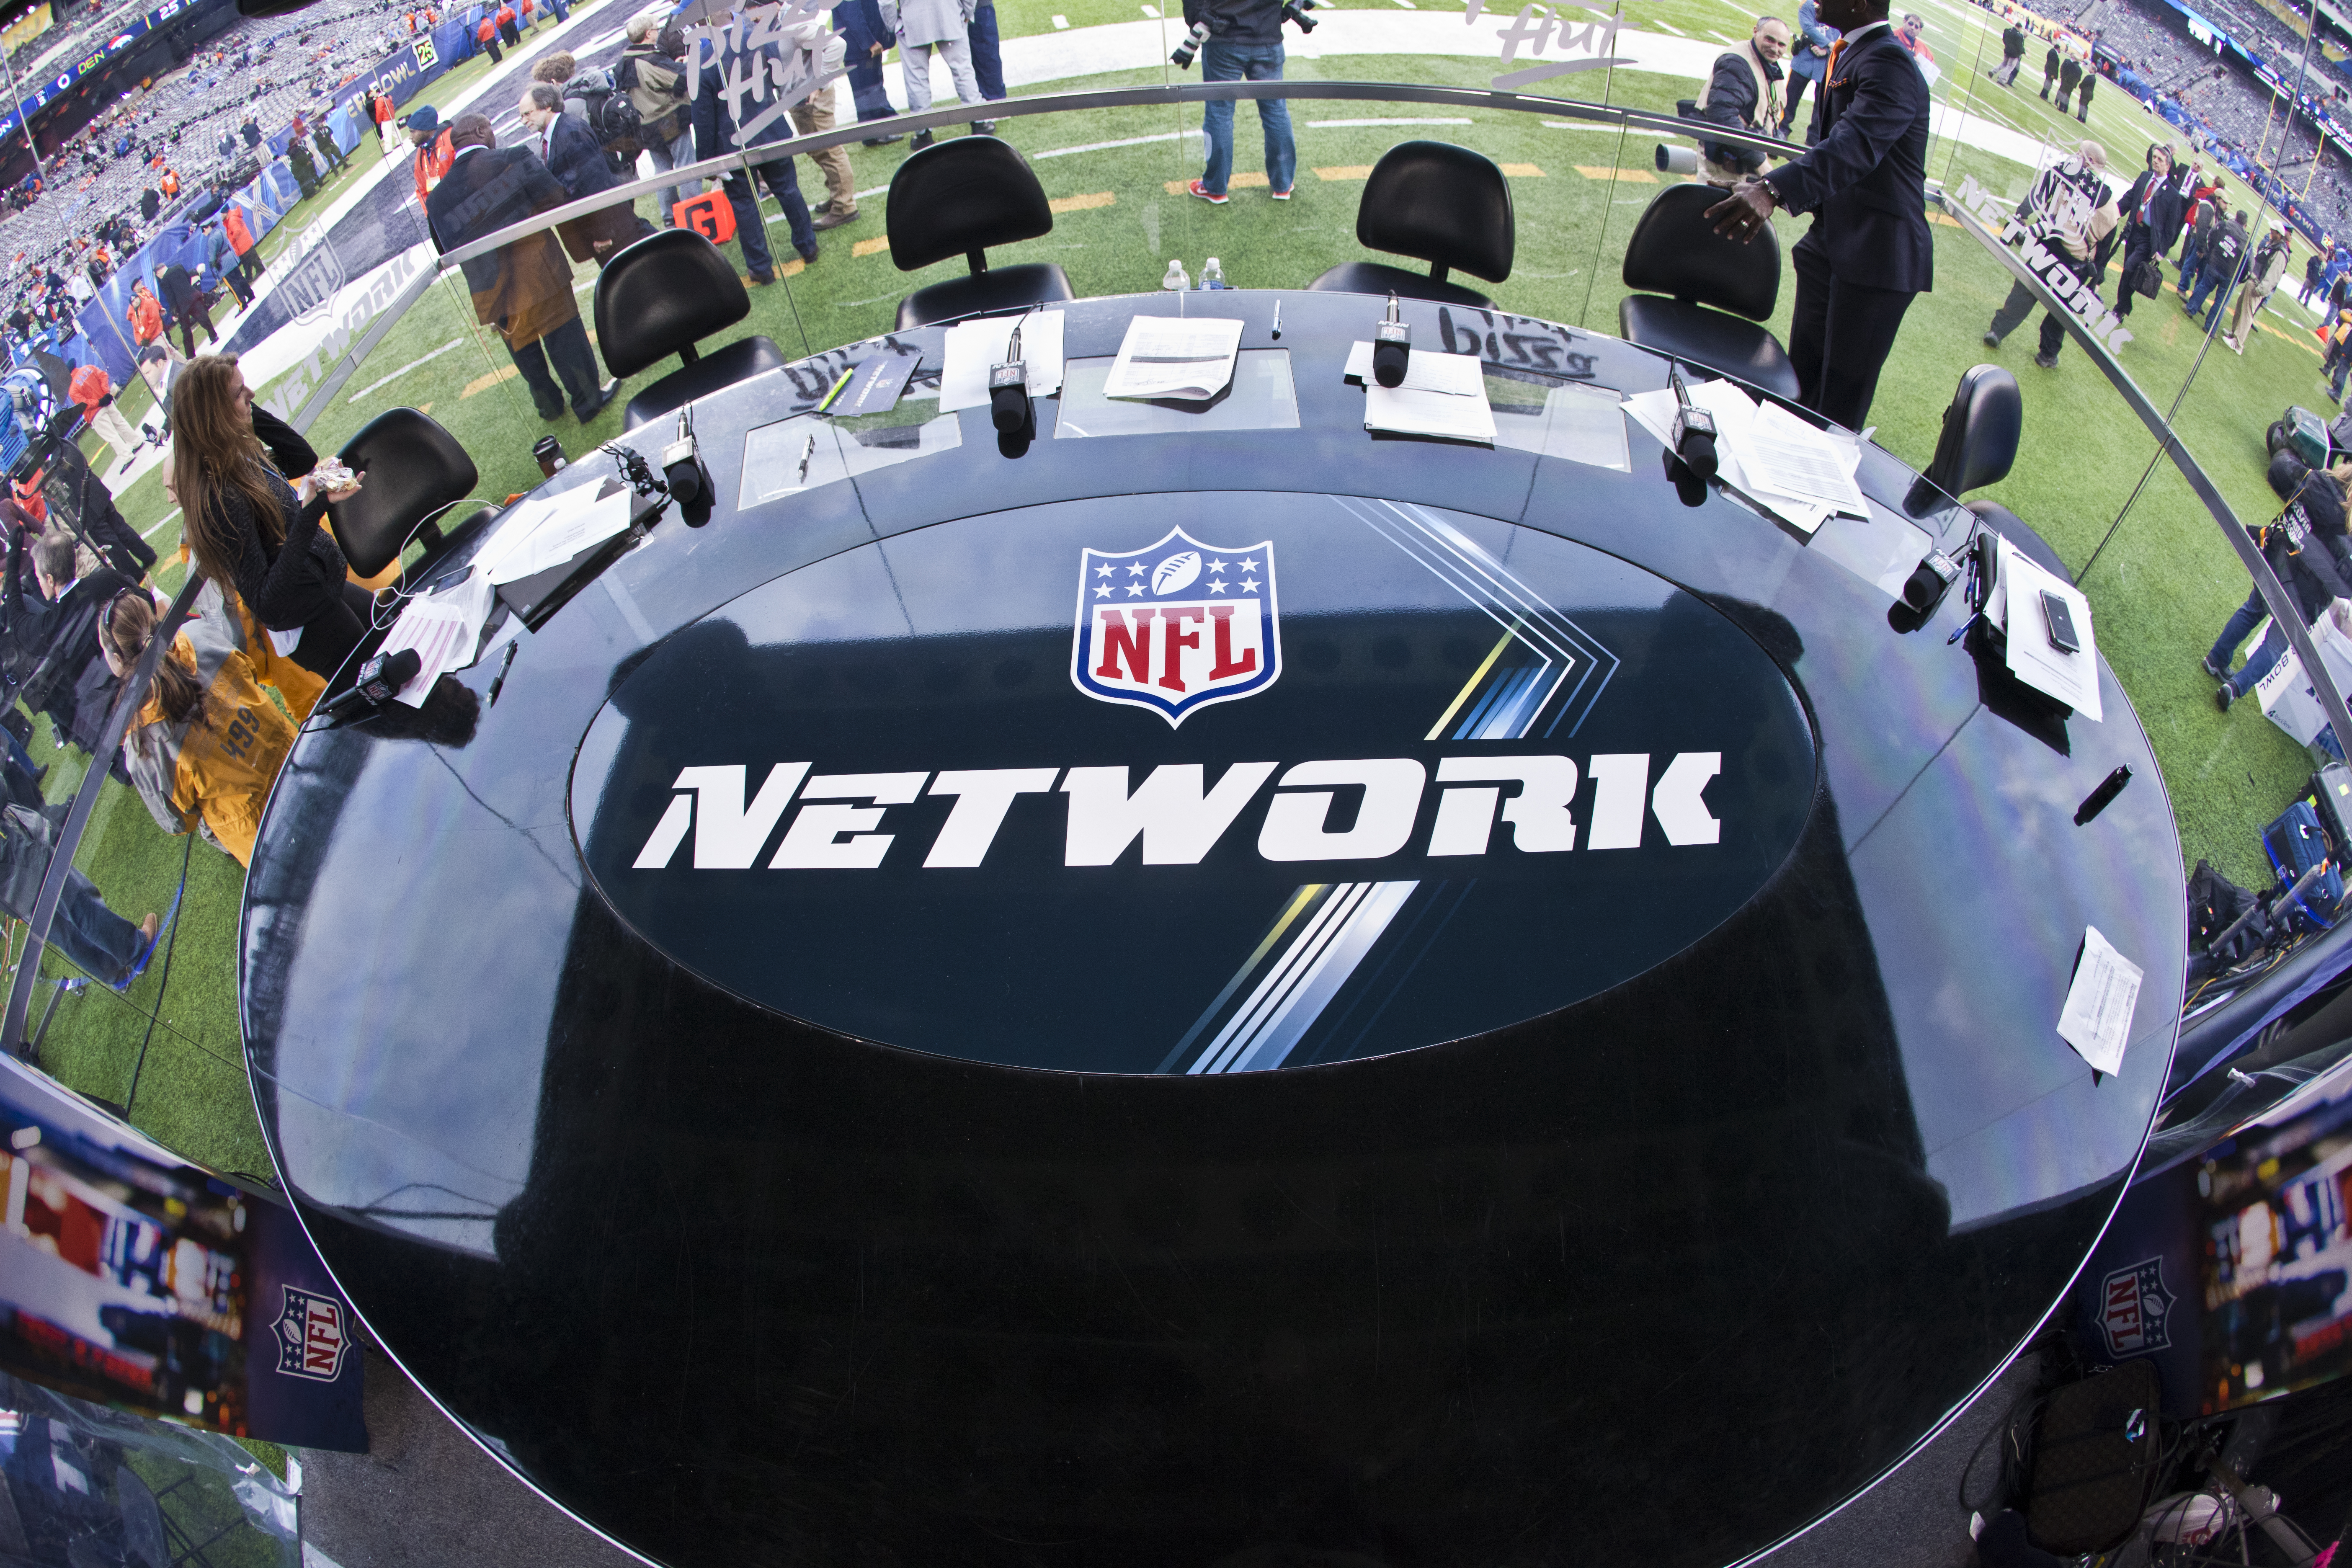 what network is showing nfl today